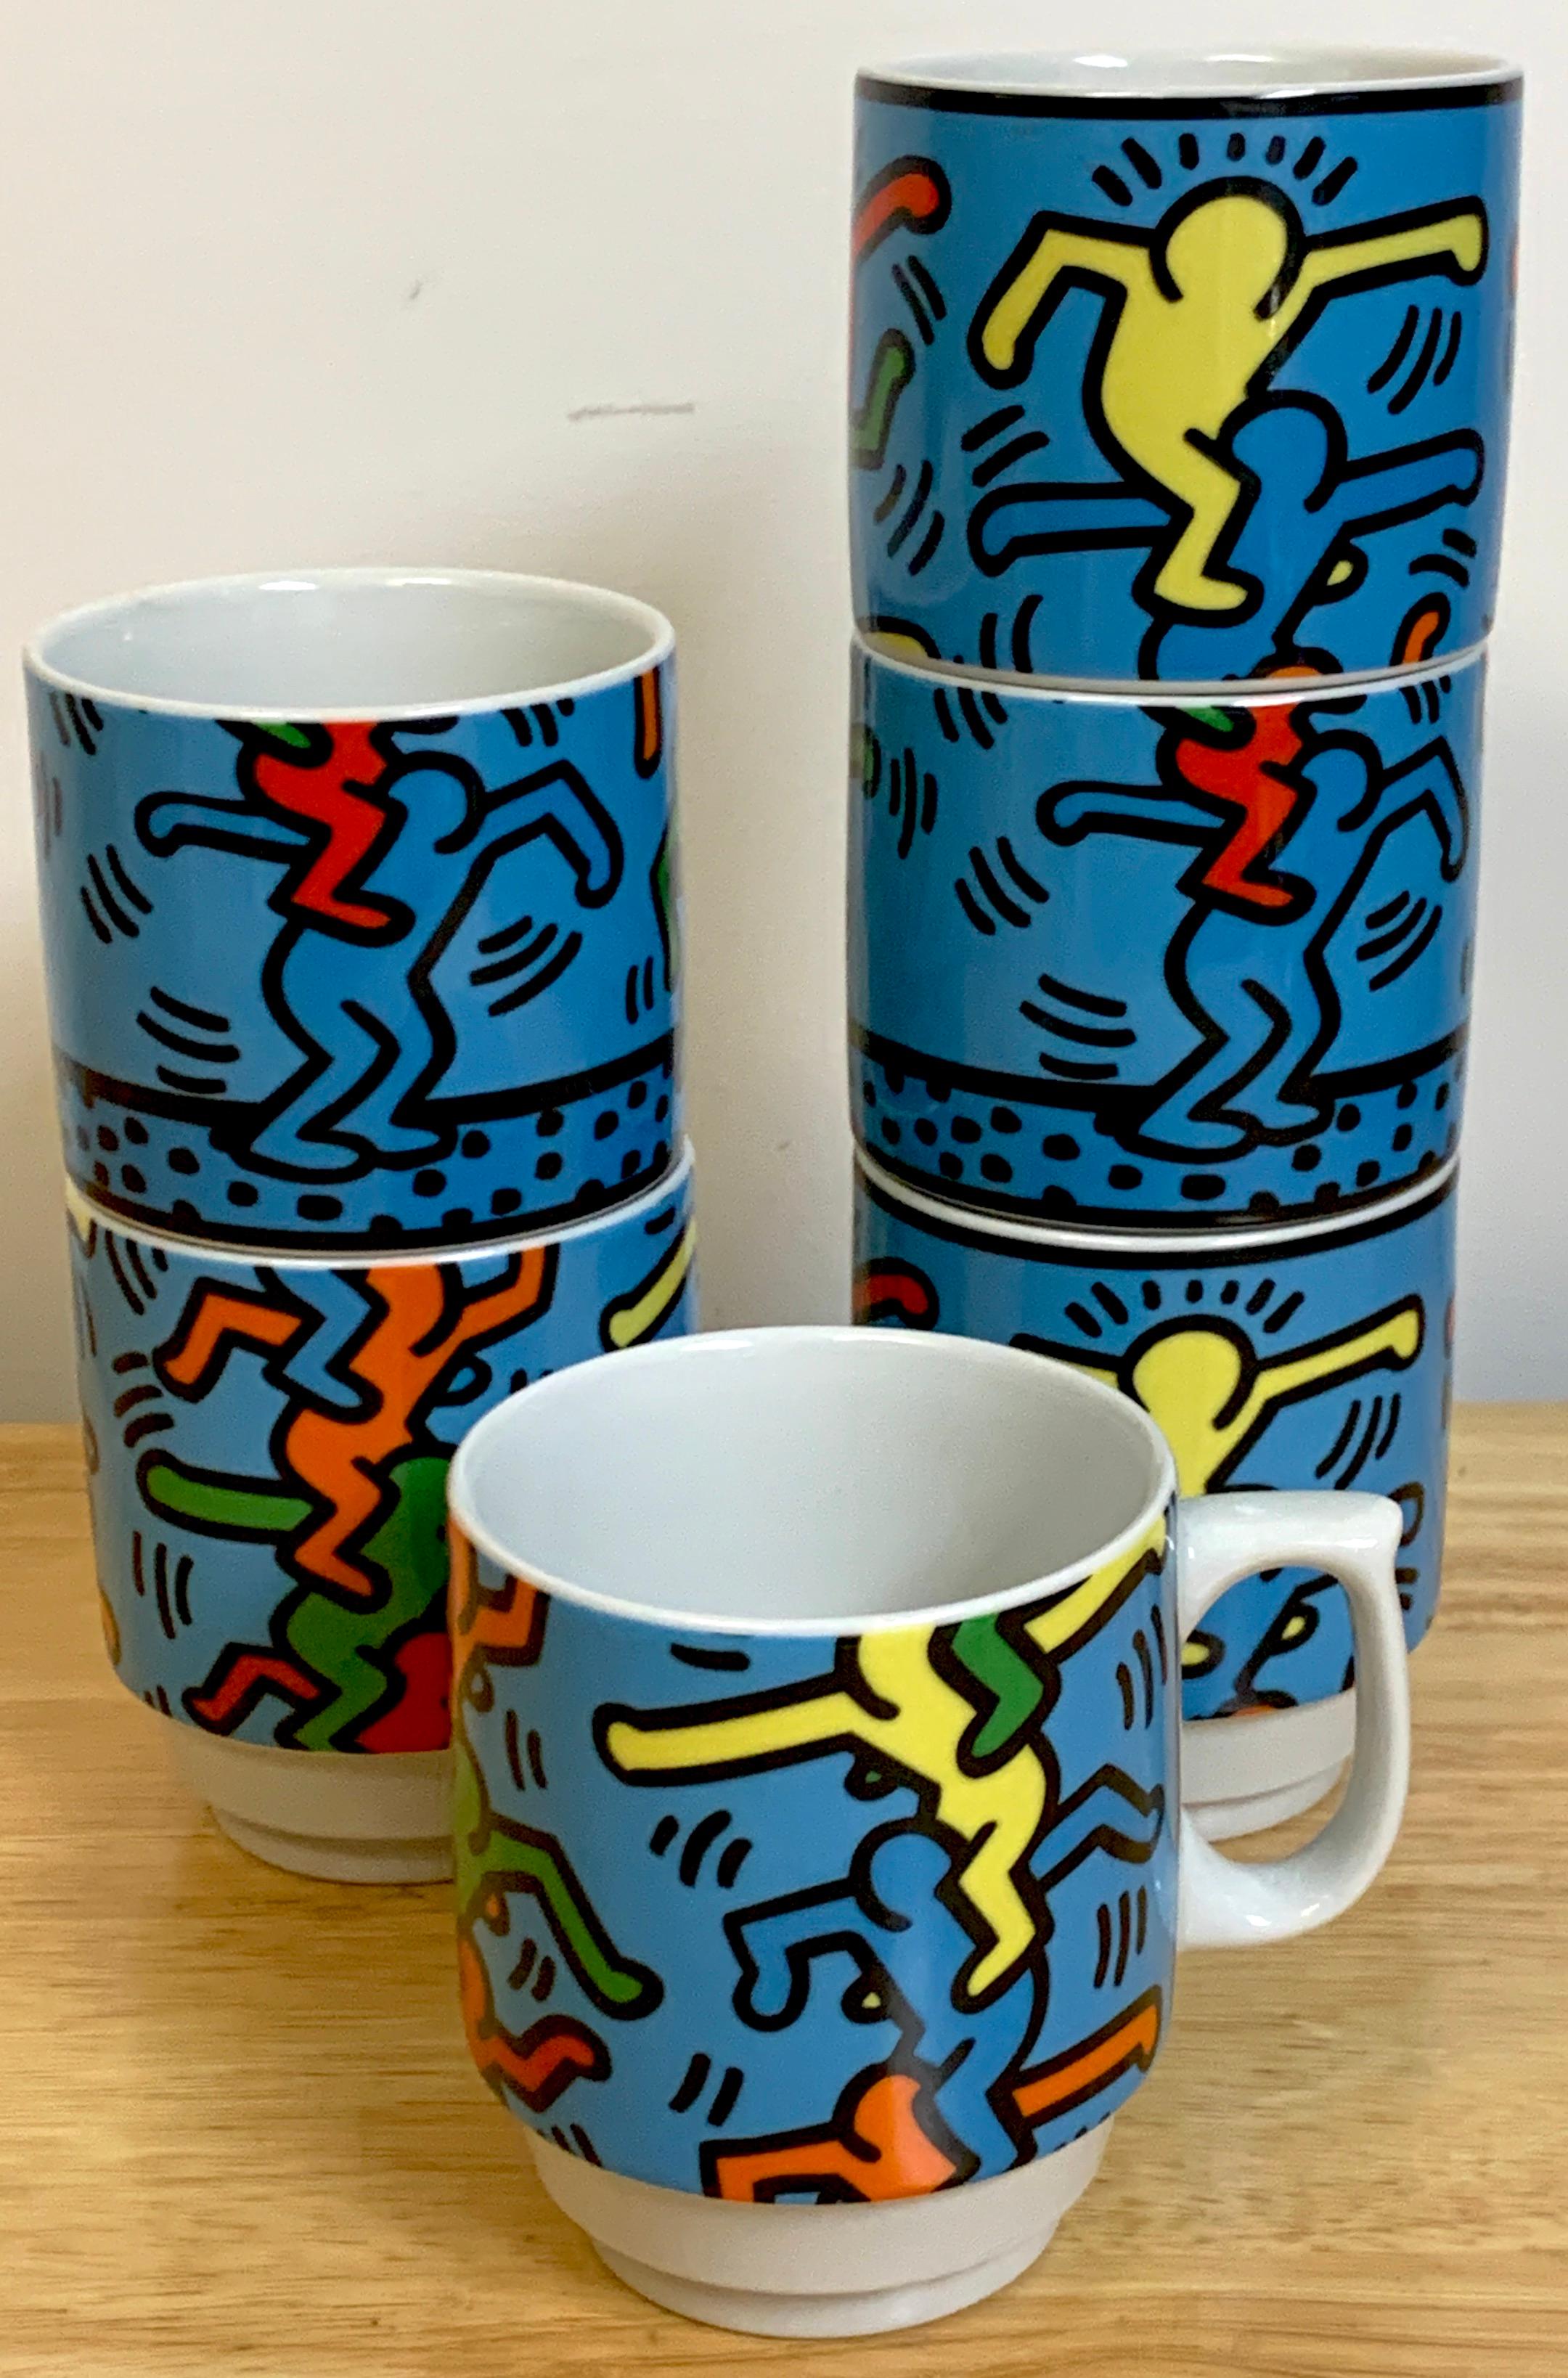 Six mugs by Keith Haring for Konitz
'Stacking Men' 
Made in Germany
1990s.